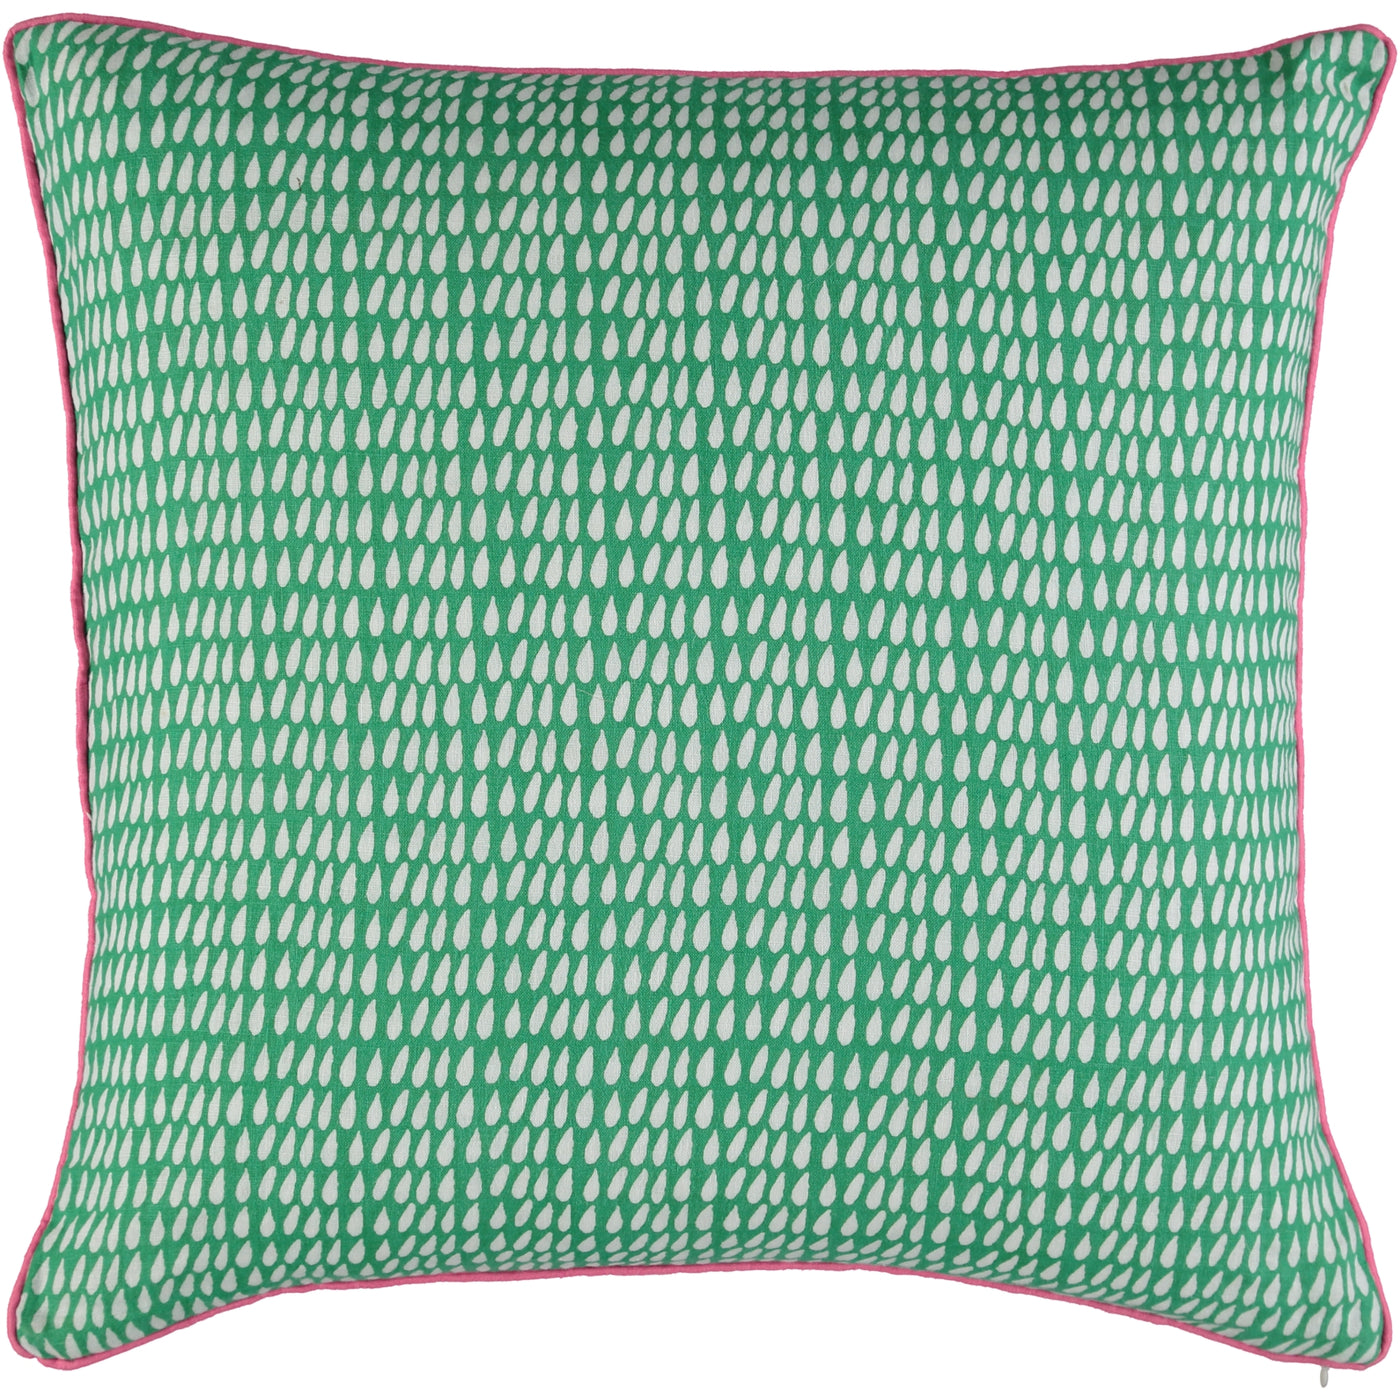 Kitty-Holmes-Green-cushion-cover-with-white-drops-and-pink-piping-colourful-cushion